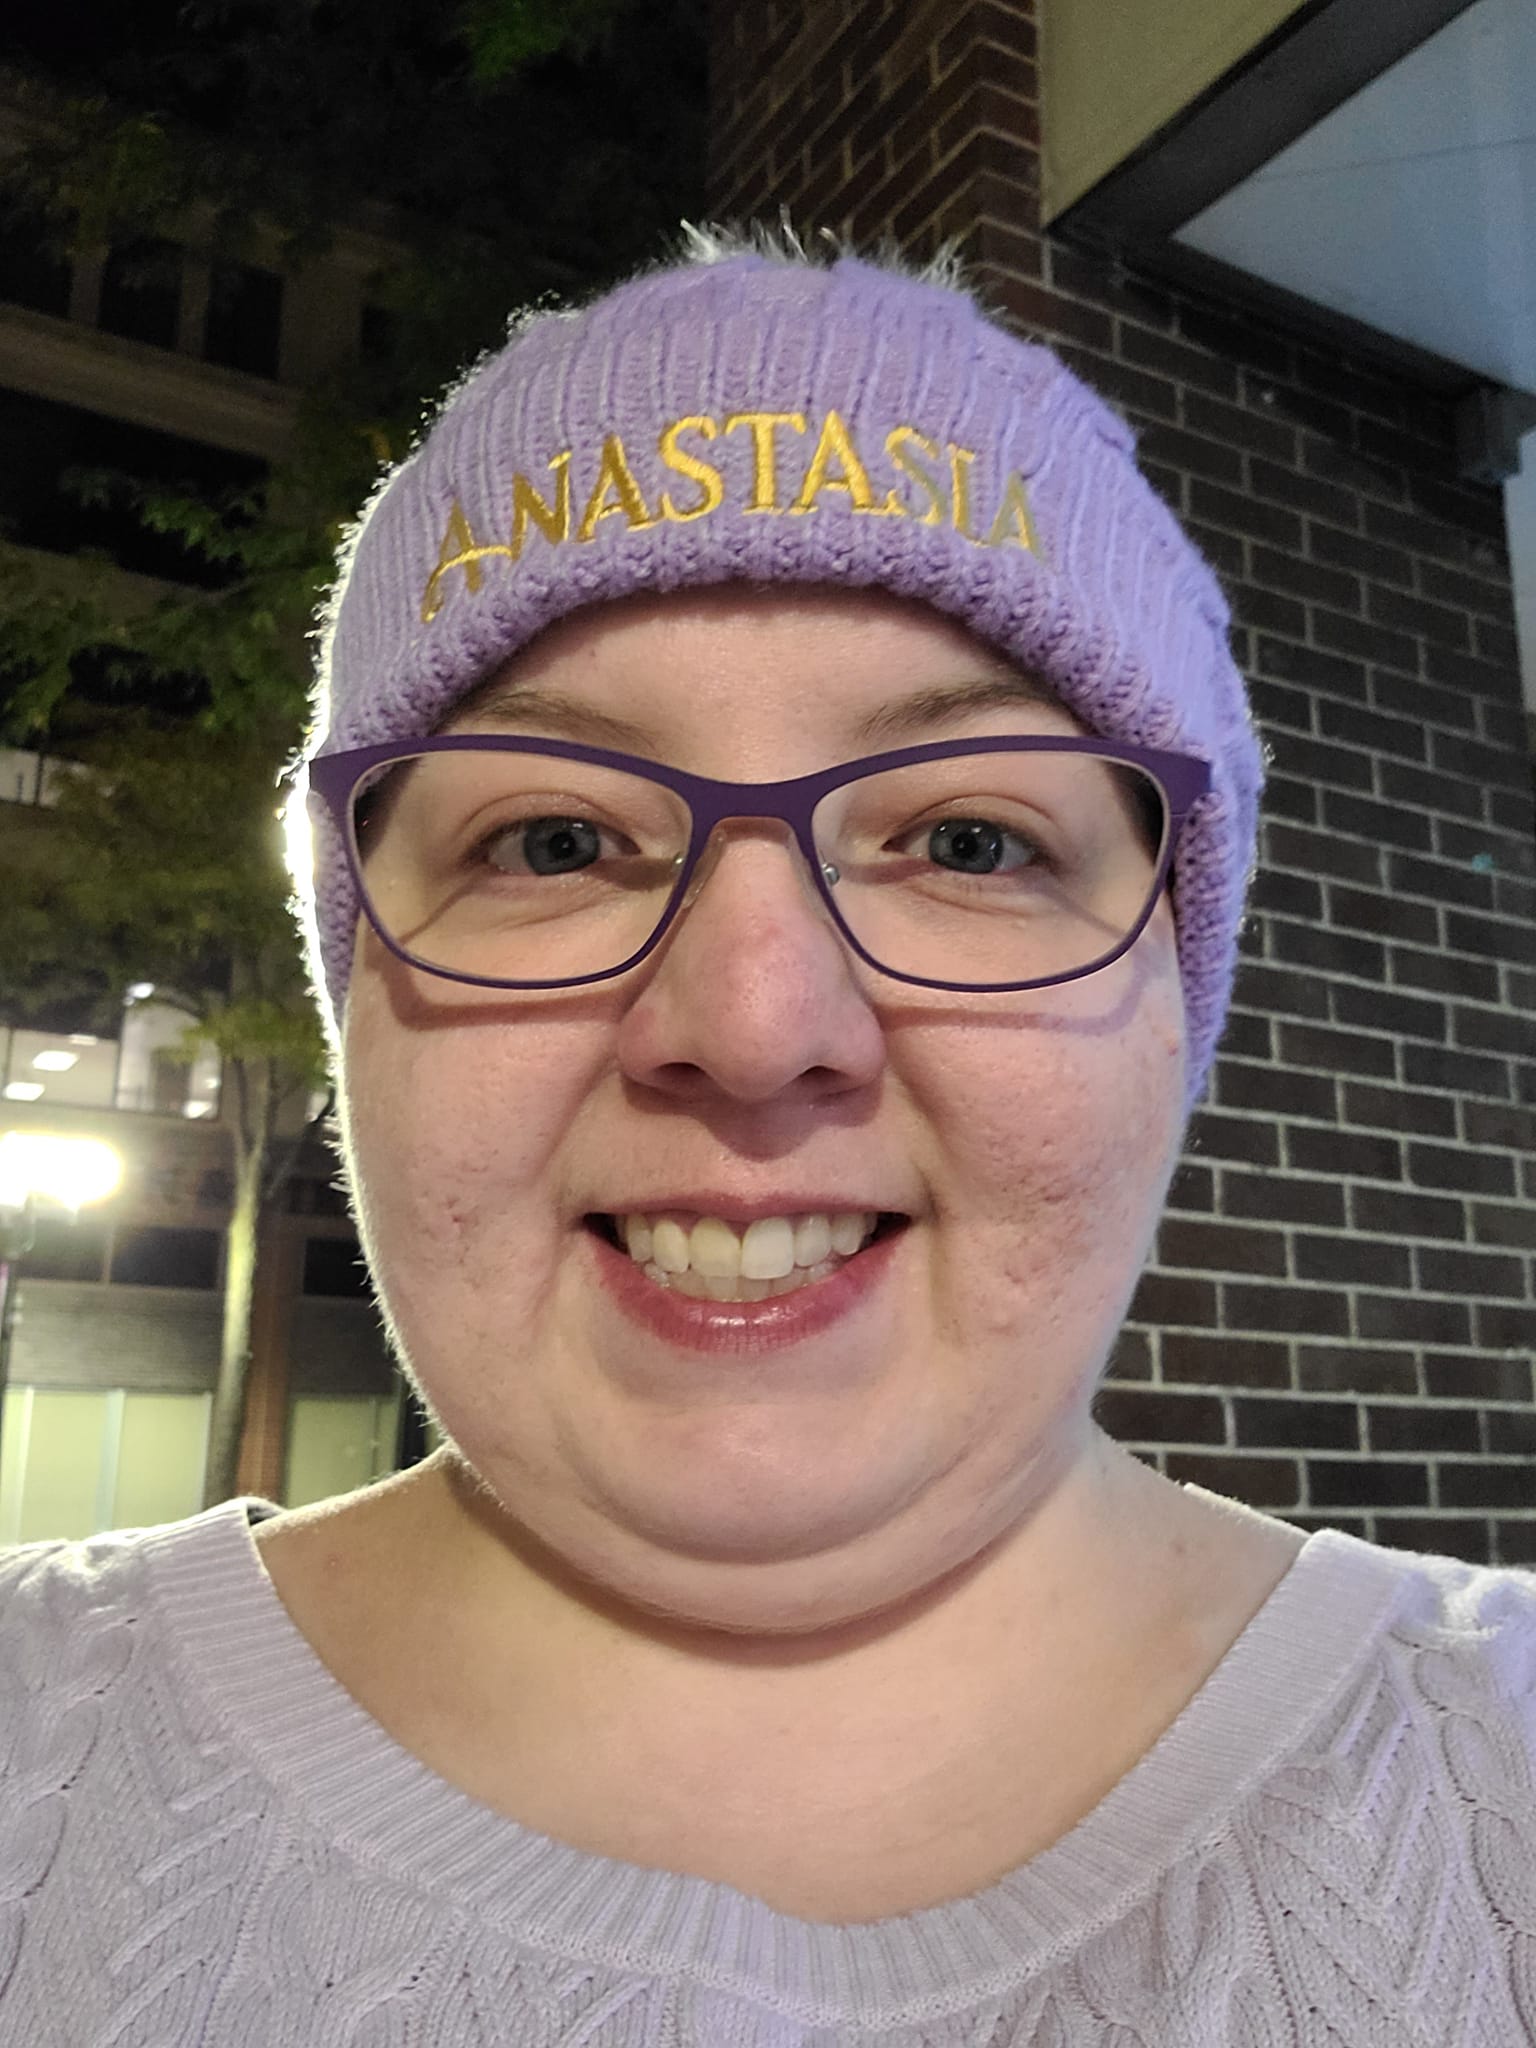 A woman dressed all in purple wearing a hat with one of their favorite theatre productions, Anastasia.